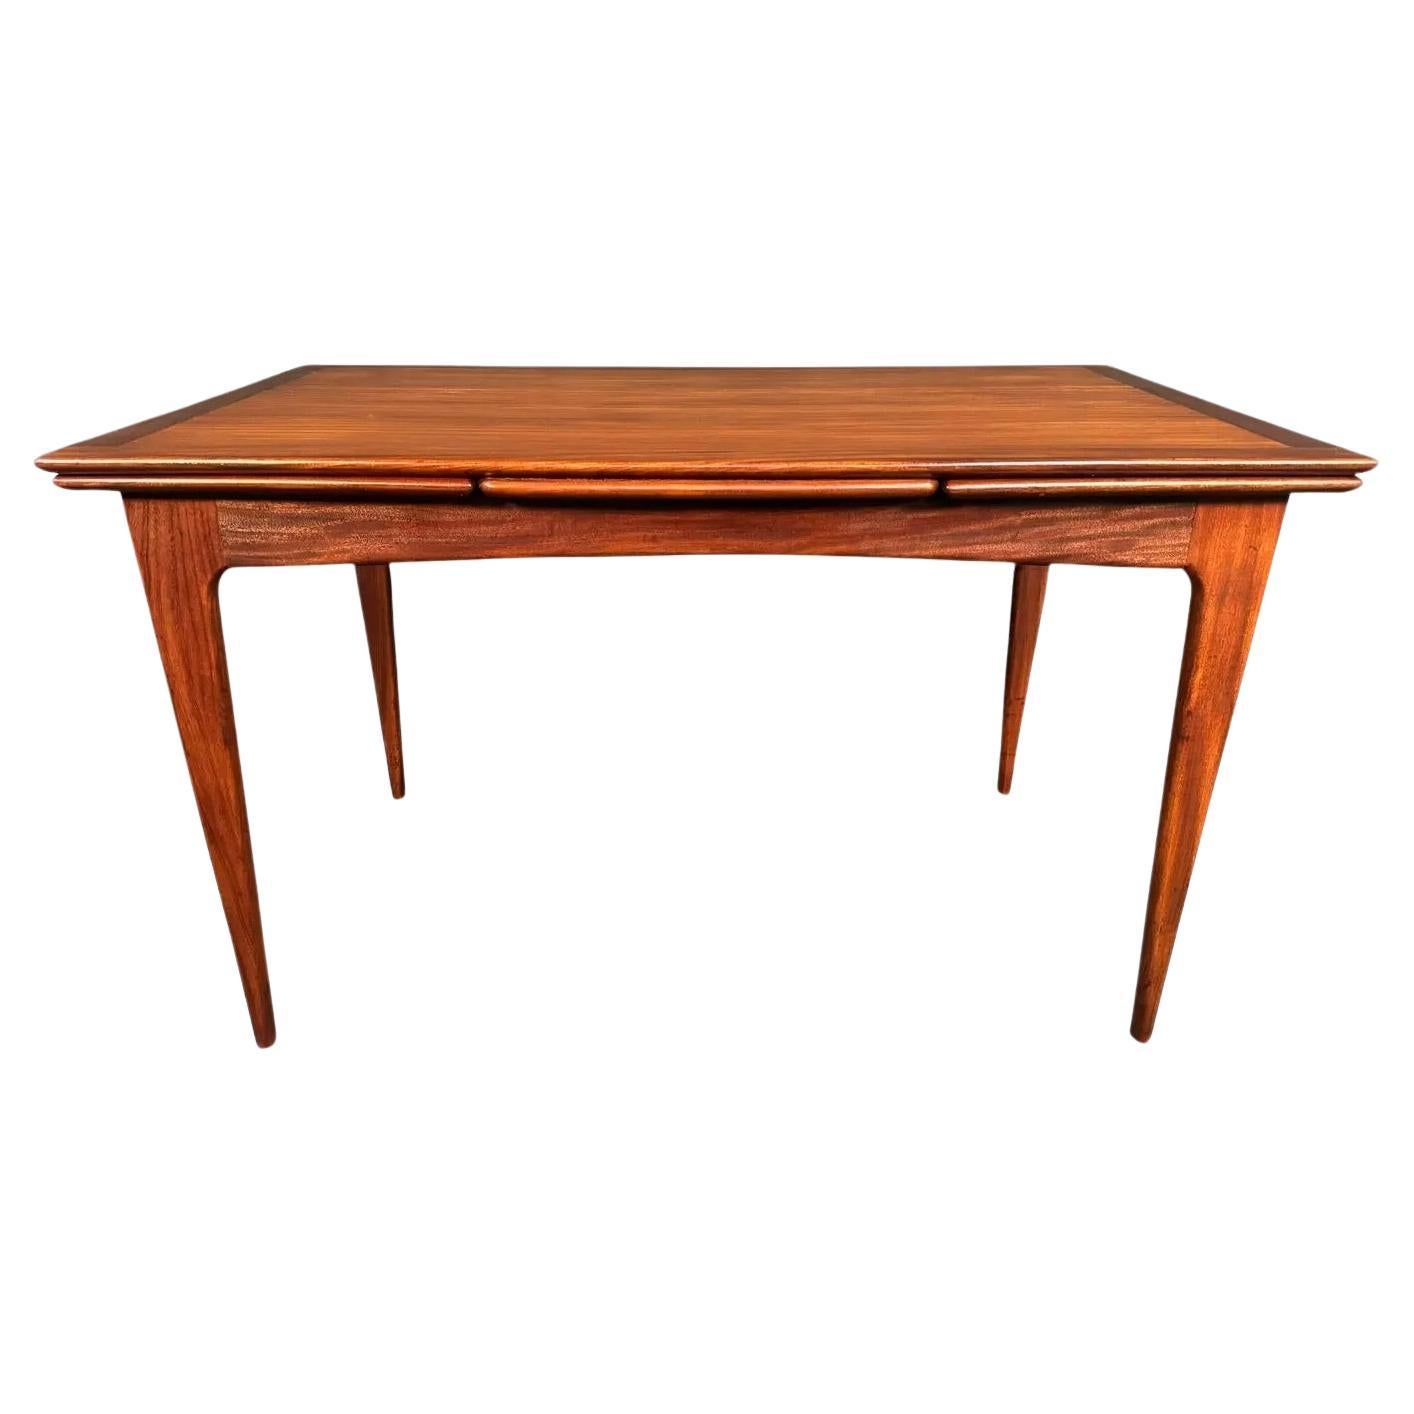 Vintage British Mid Century Modern Afromasia Teak Dining Table by A. Younger Ltd For Sale